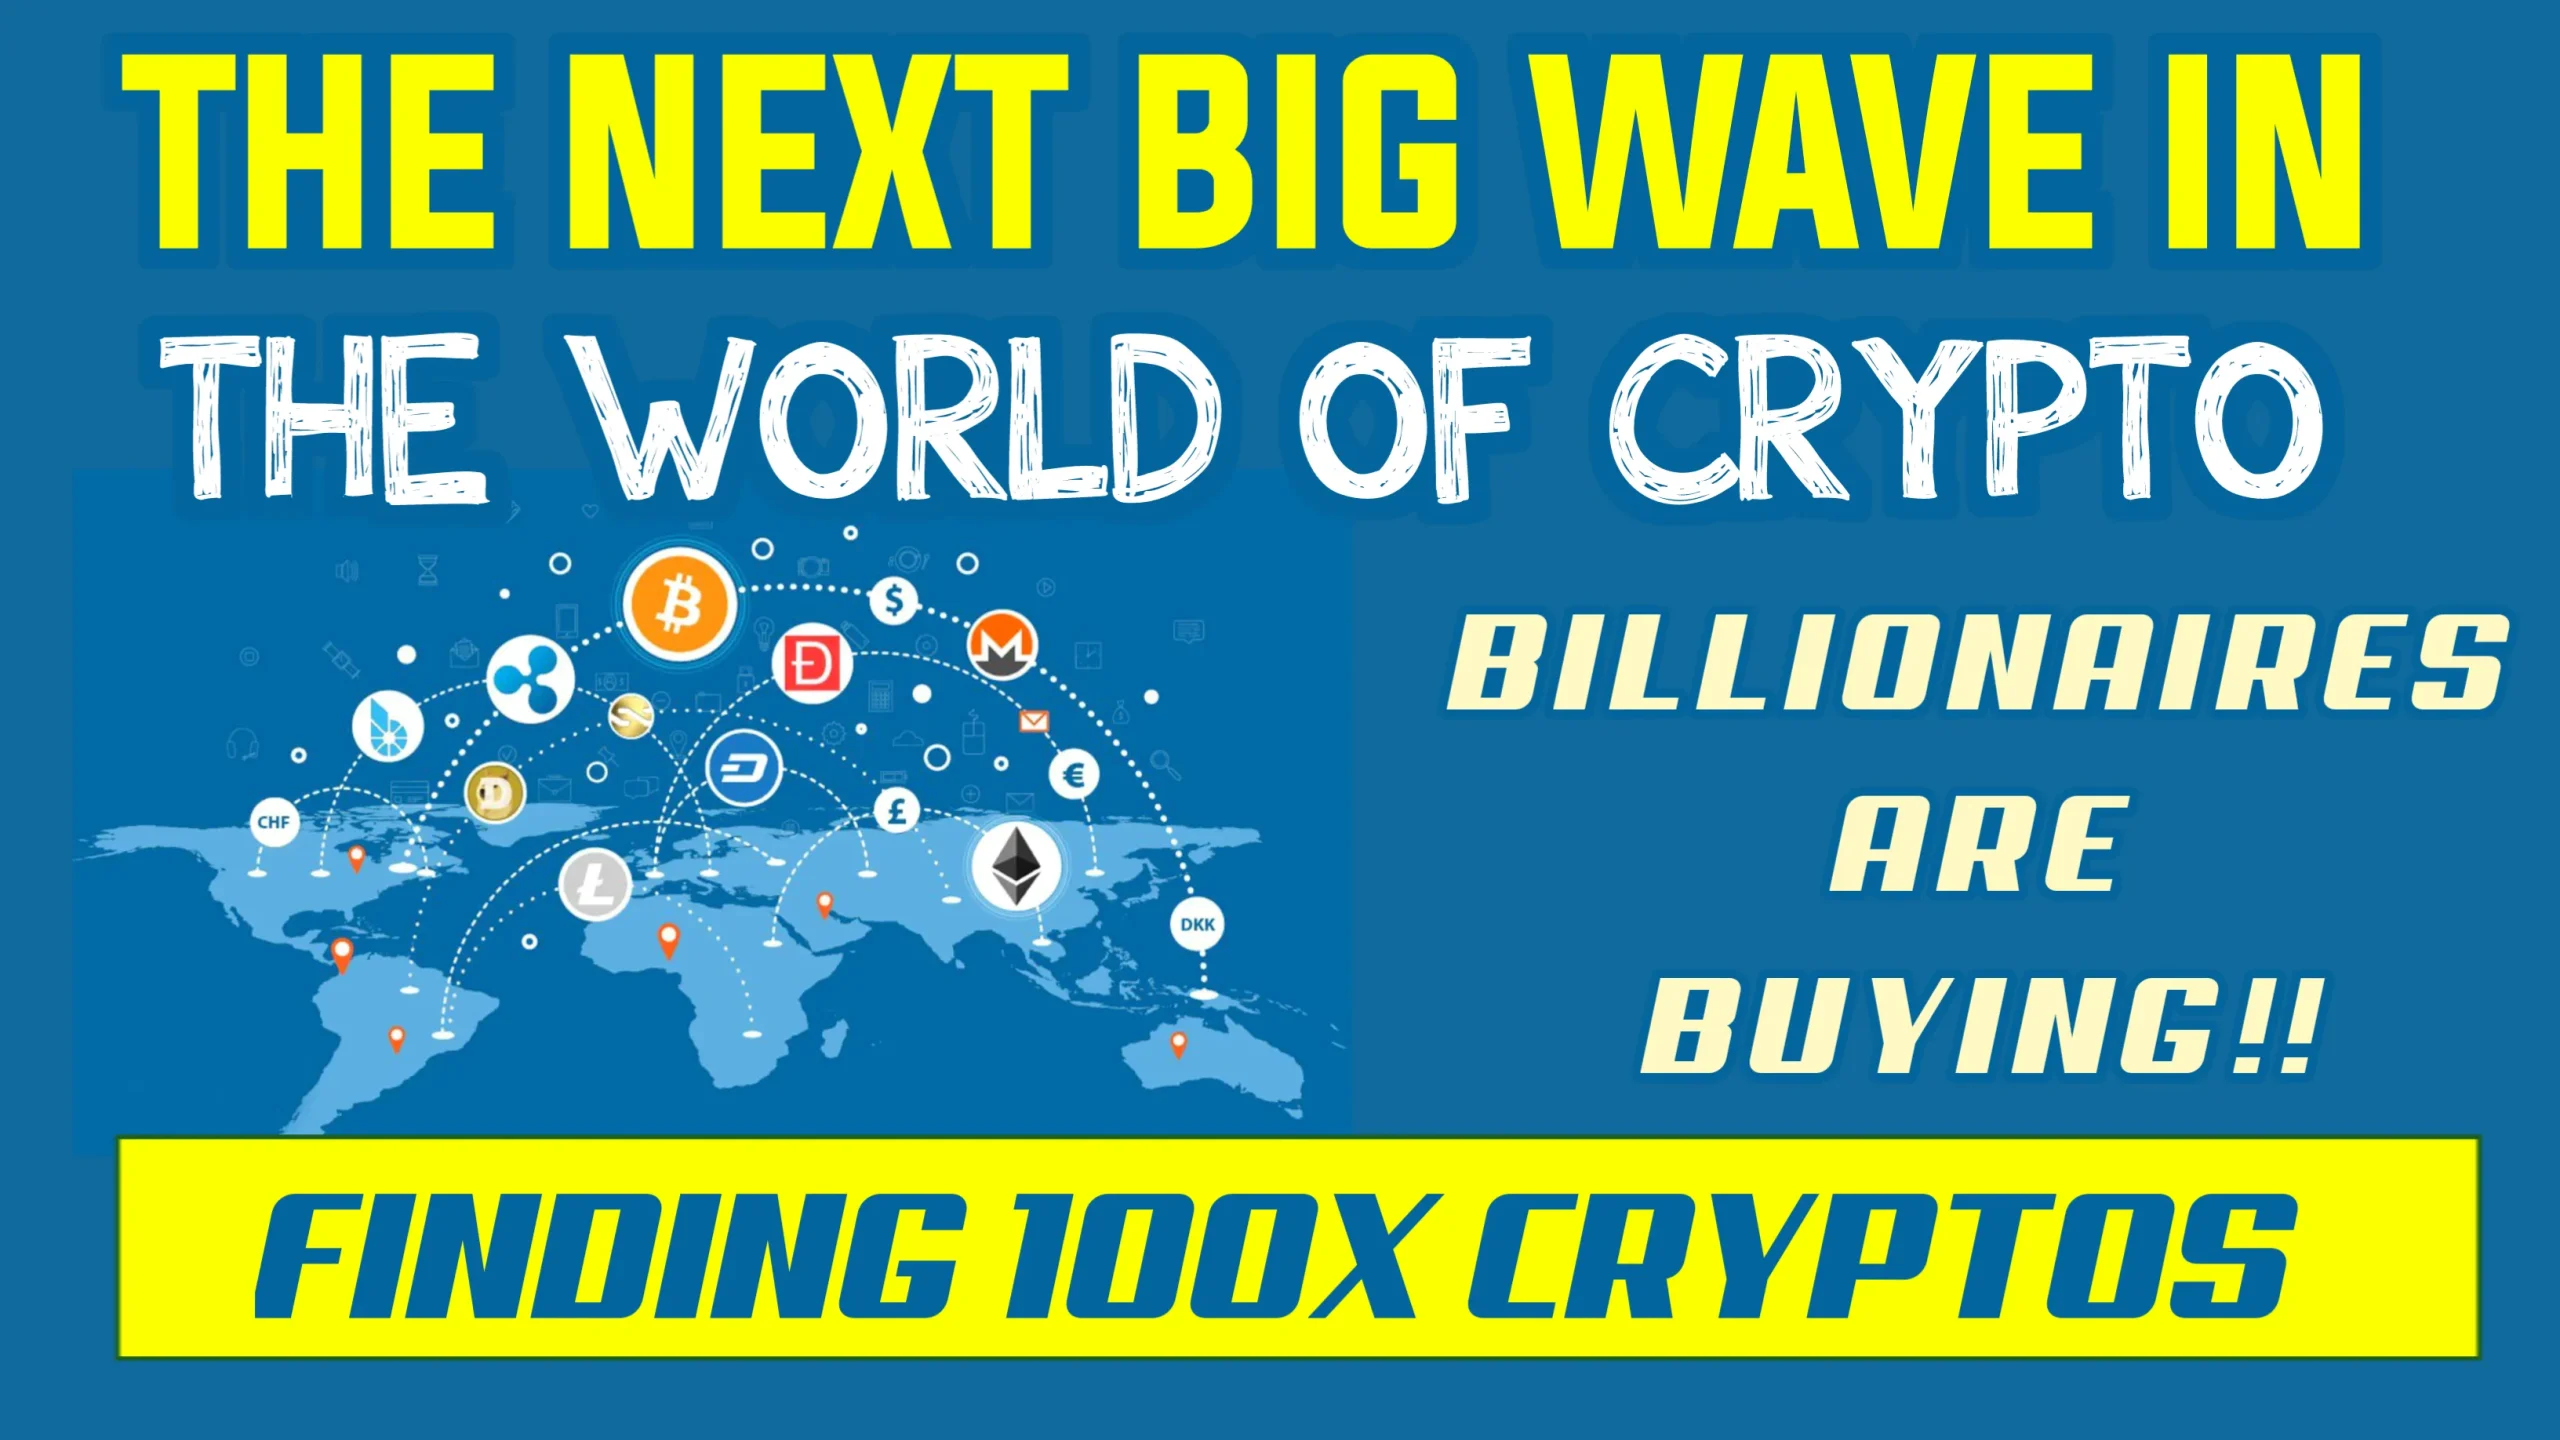 The Next Big Wave in The World of Crypto